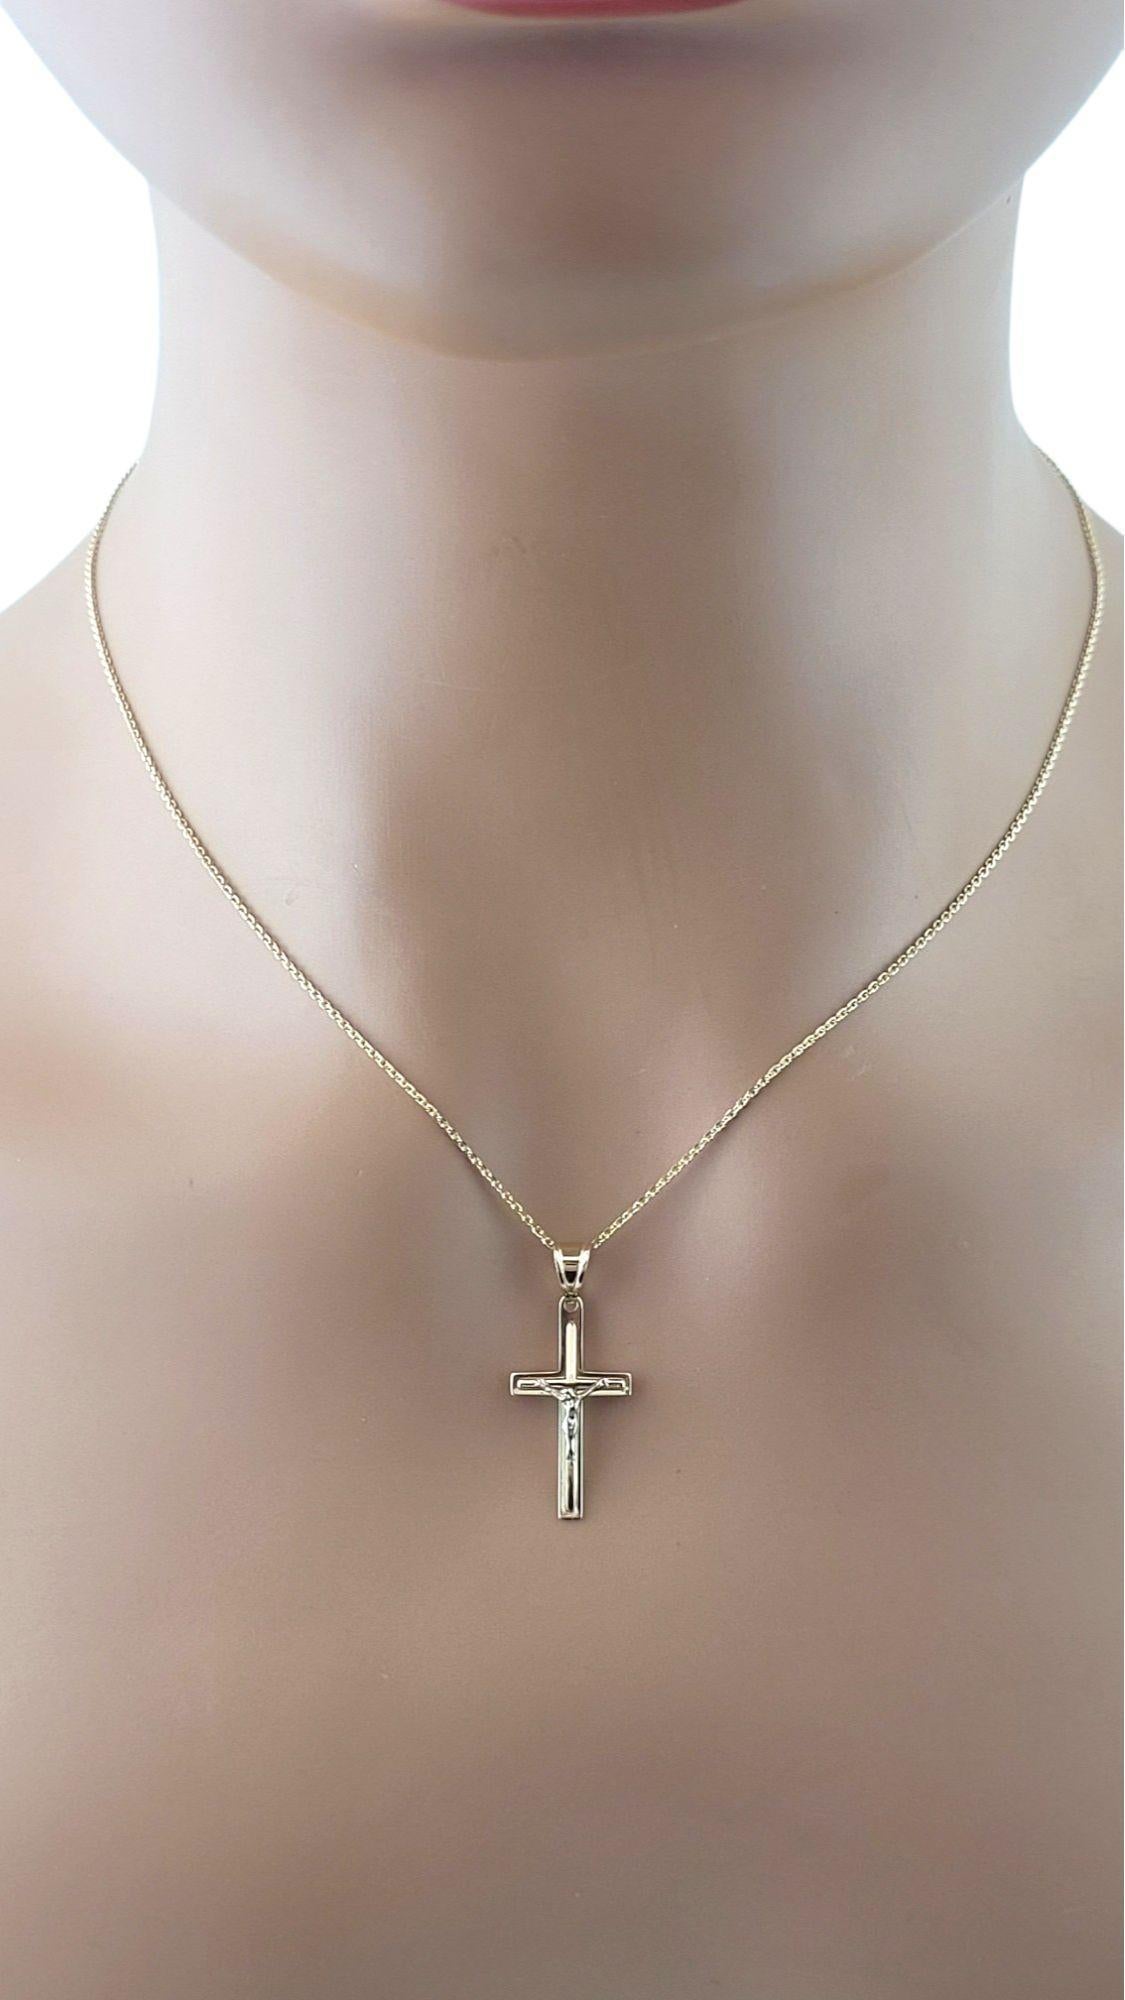  14K Yellow and White Gold Crucifix Pendant Necklace #14976 For Sale 3